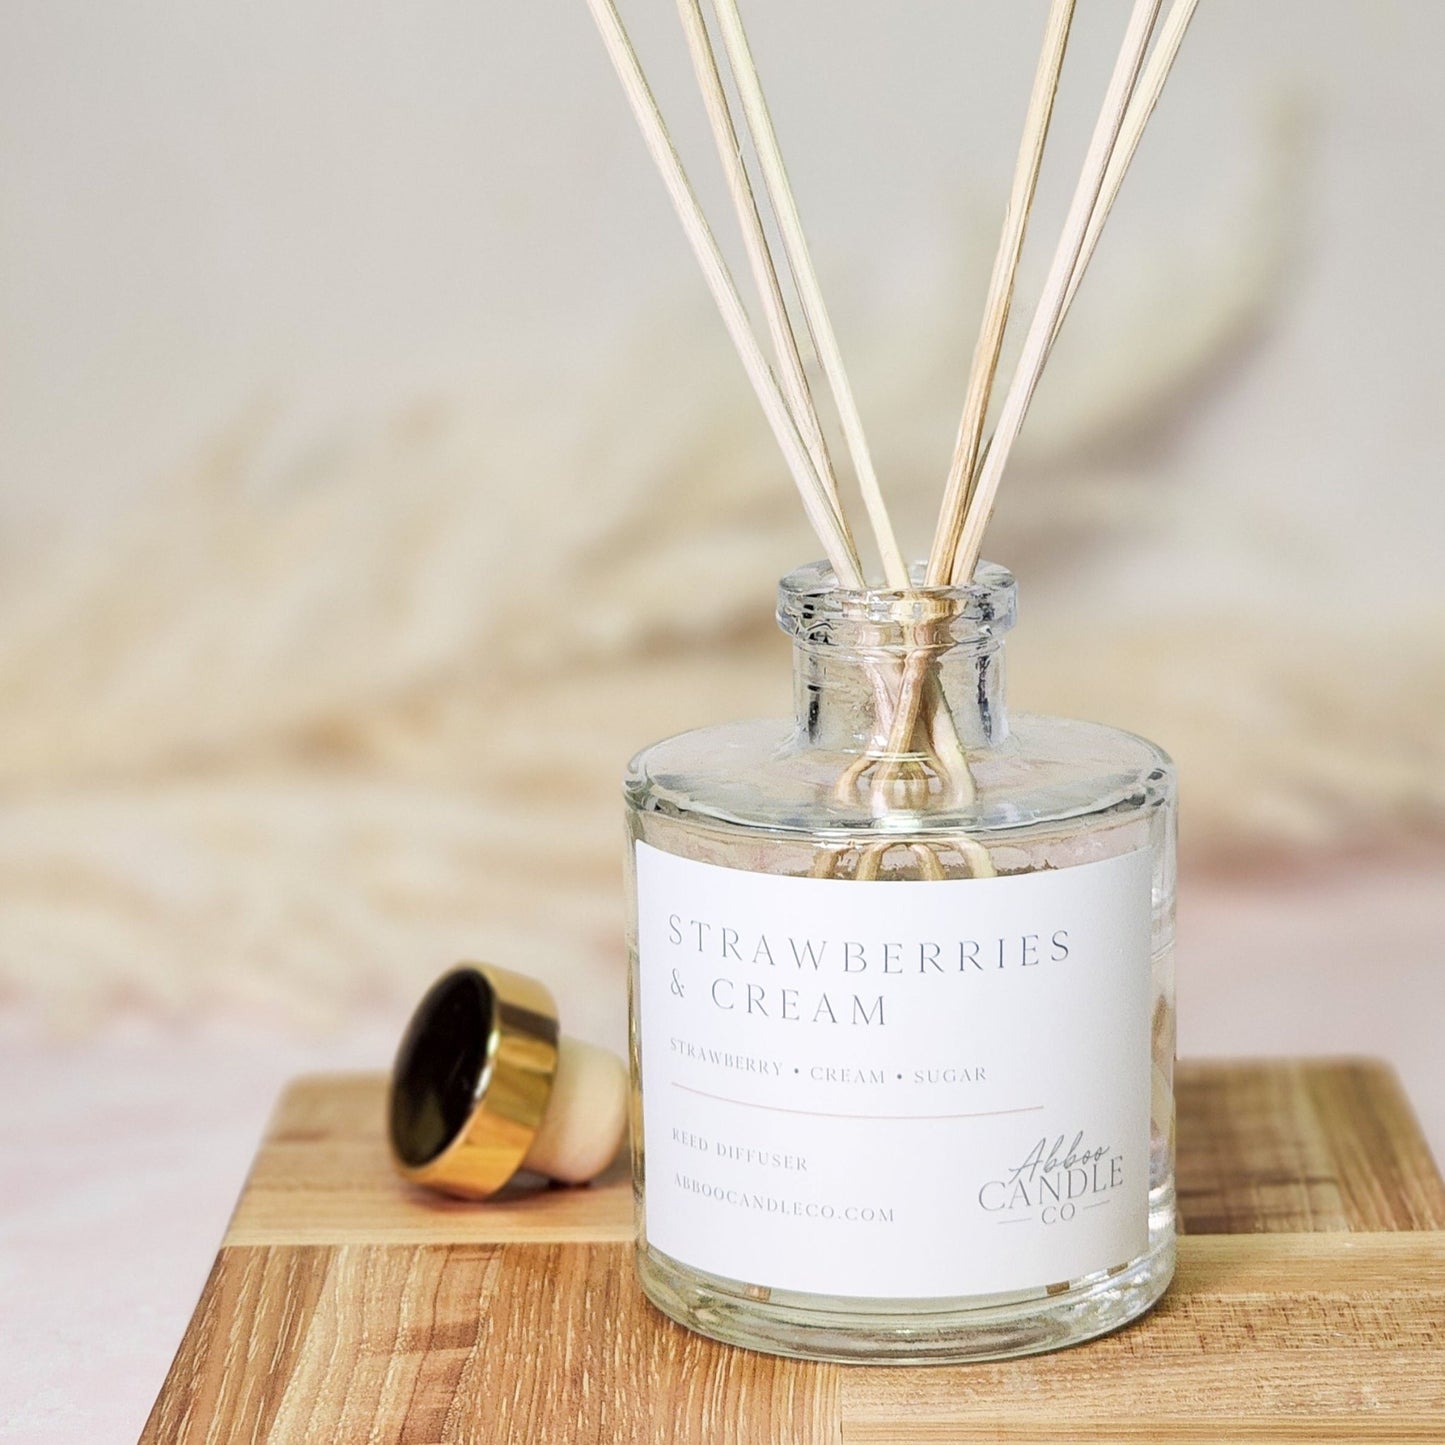 Strawberries and Cream Reed Diffuser - Abboo Candle Co